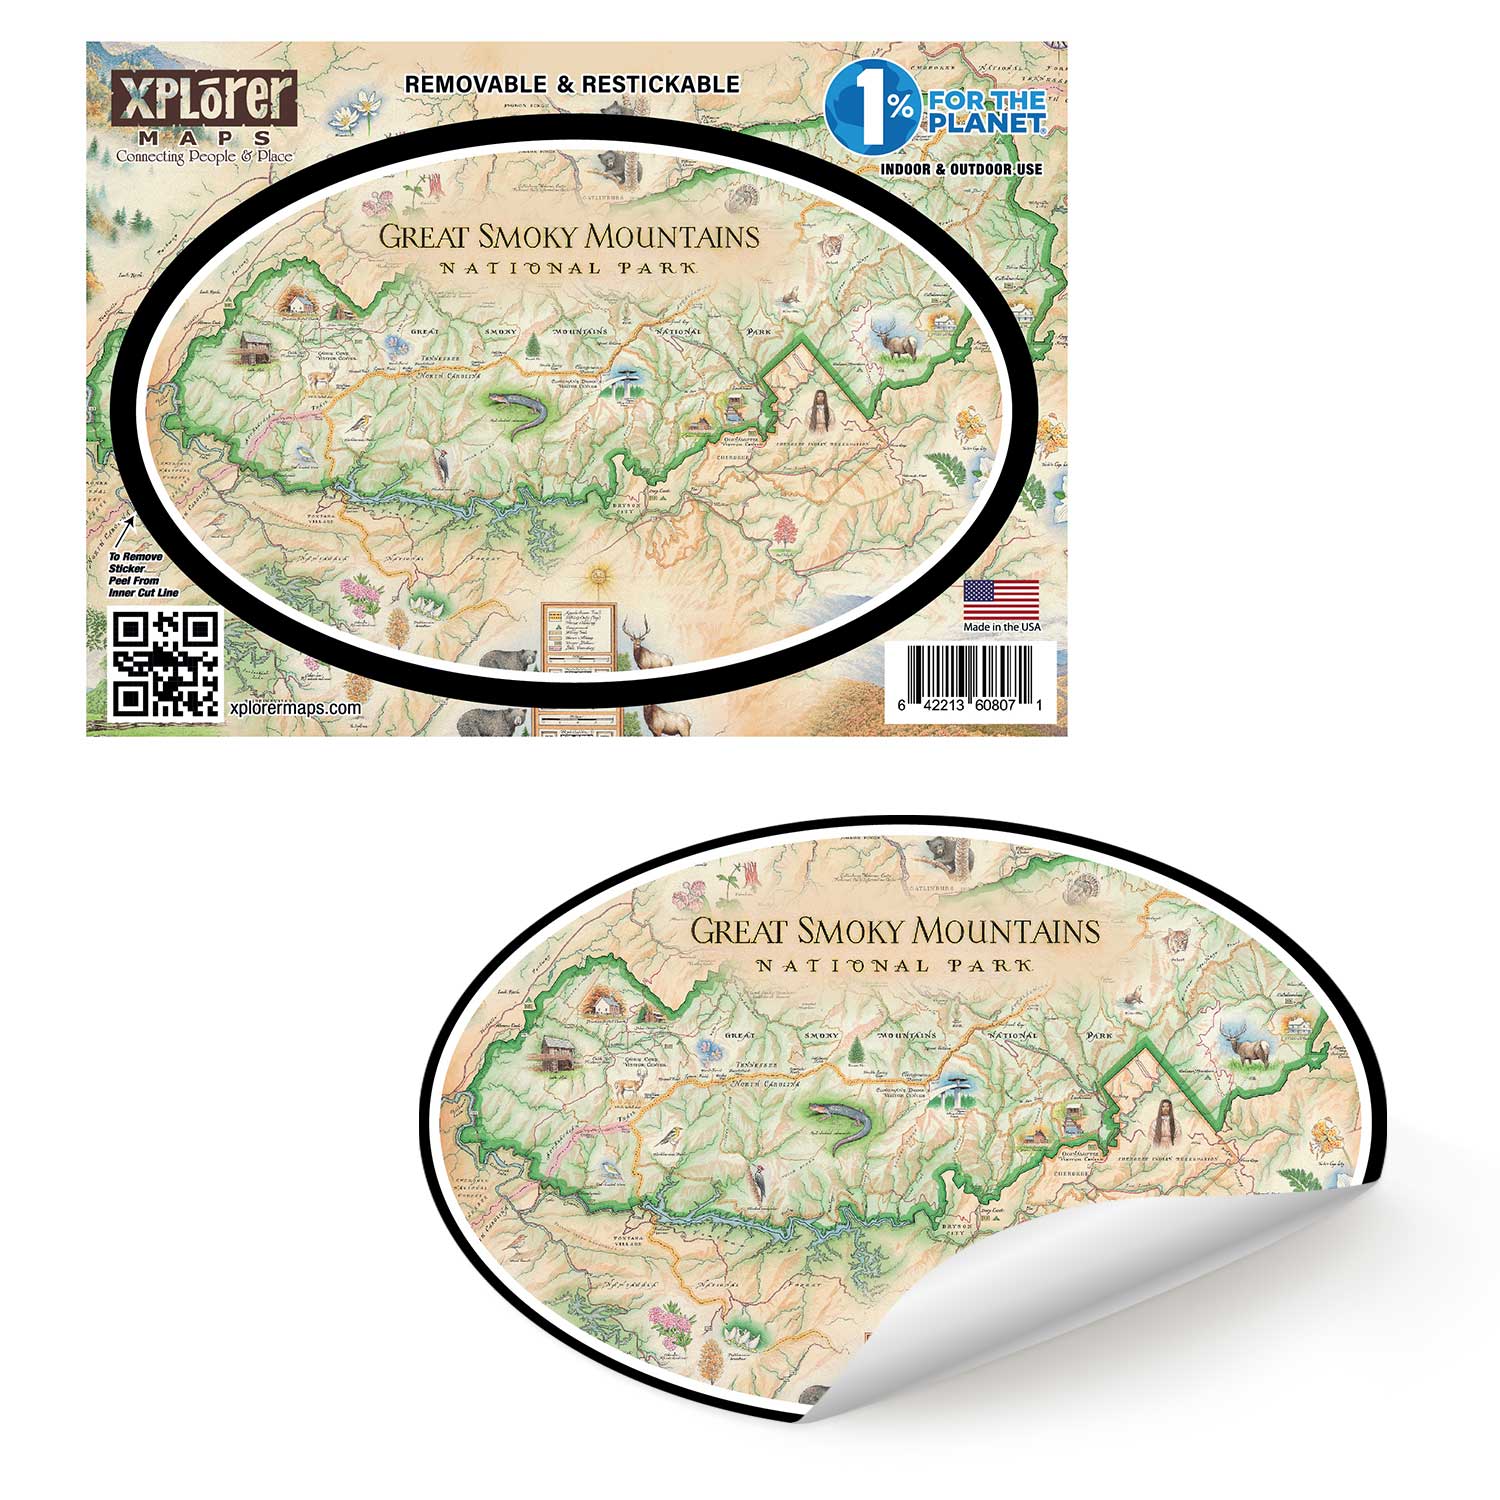 Great Smoky Mountain National Park Map Sticker by Xplorer Maps. The map depicts the entire National Park on the border of North Carolina and Tennessee. It features illustrations of a salamander, woodpecker, Clingman's Dome, Sugarland's Visitor Center, and Oconoluftee Visitor Center. 